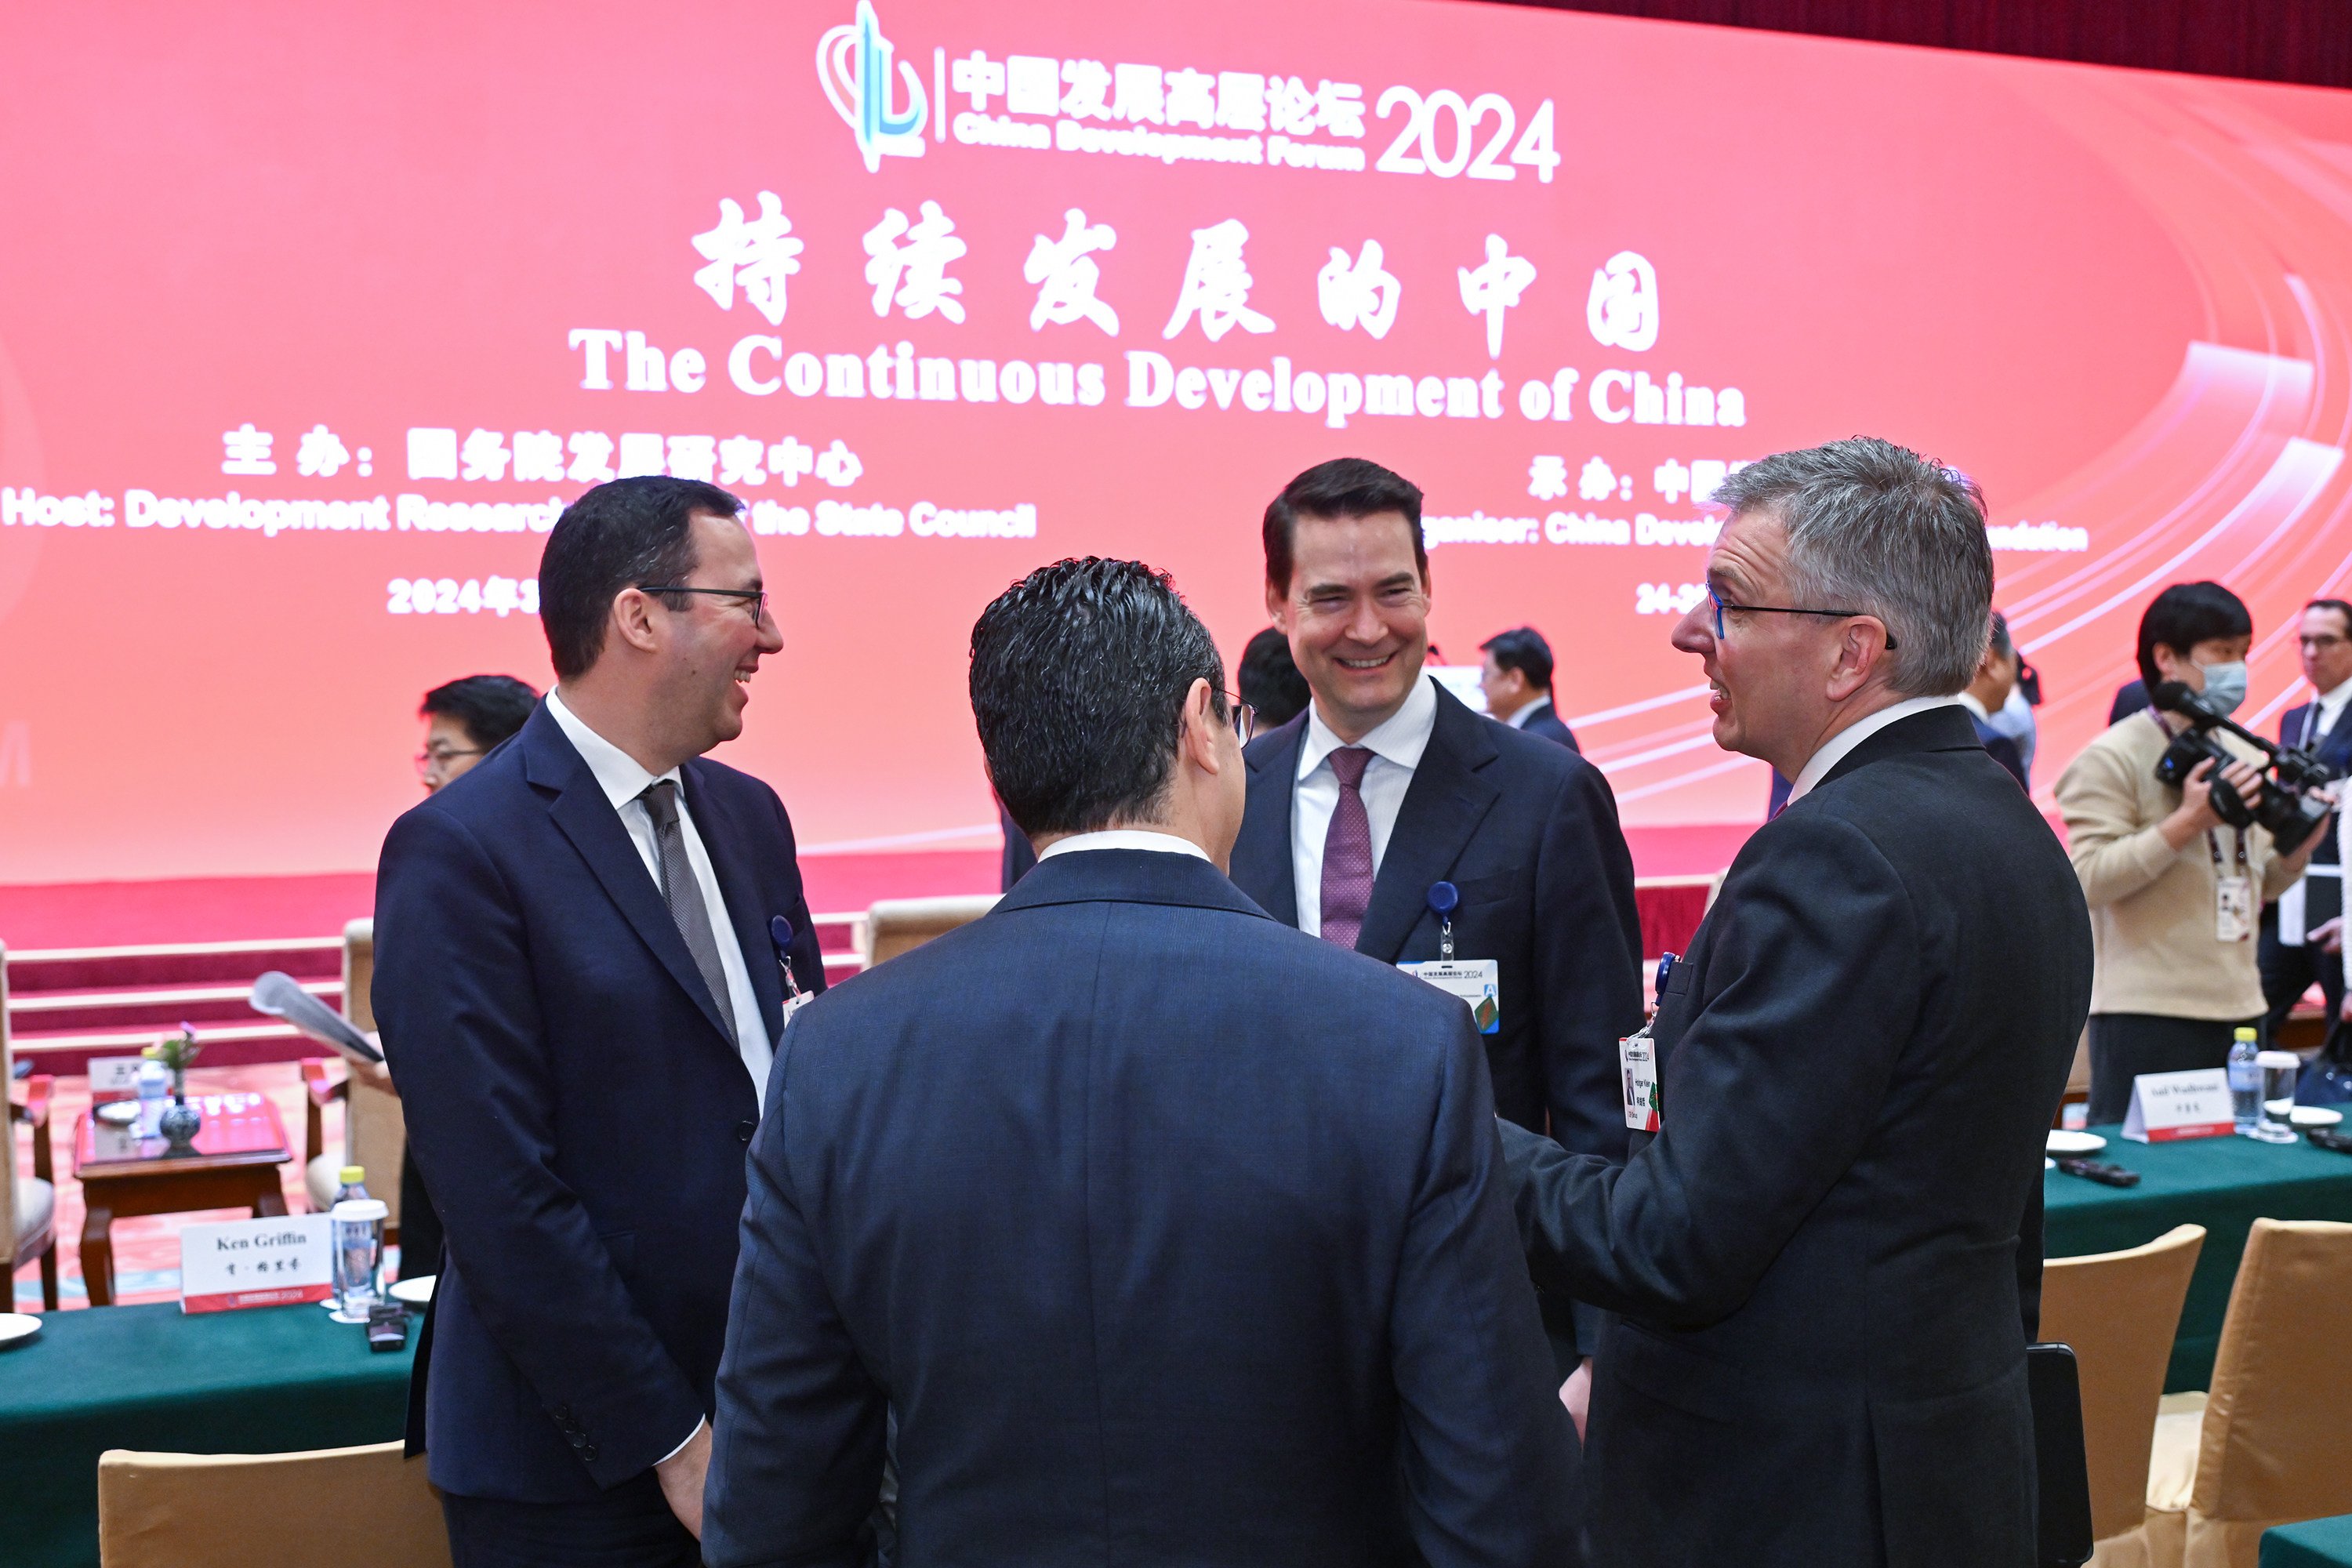 People chat before the opening ceremony of the China Development Forum 2024 in Beijing. Photo: Xinhua